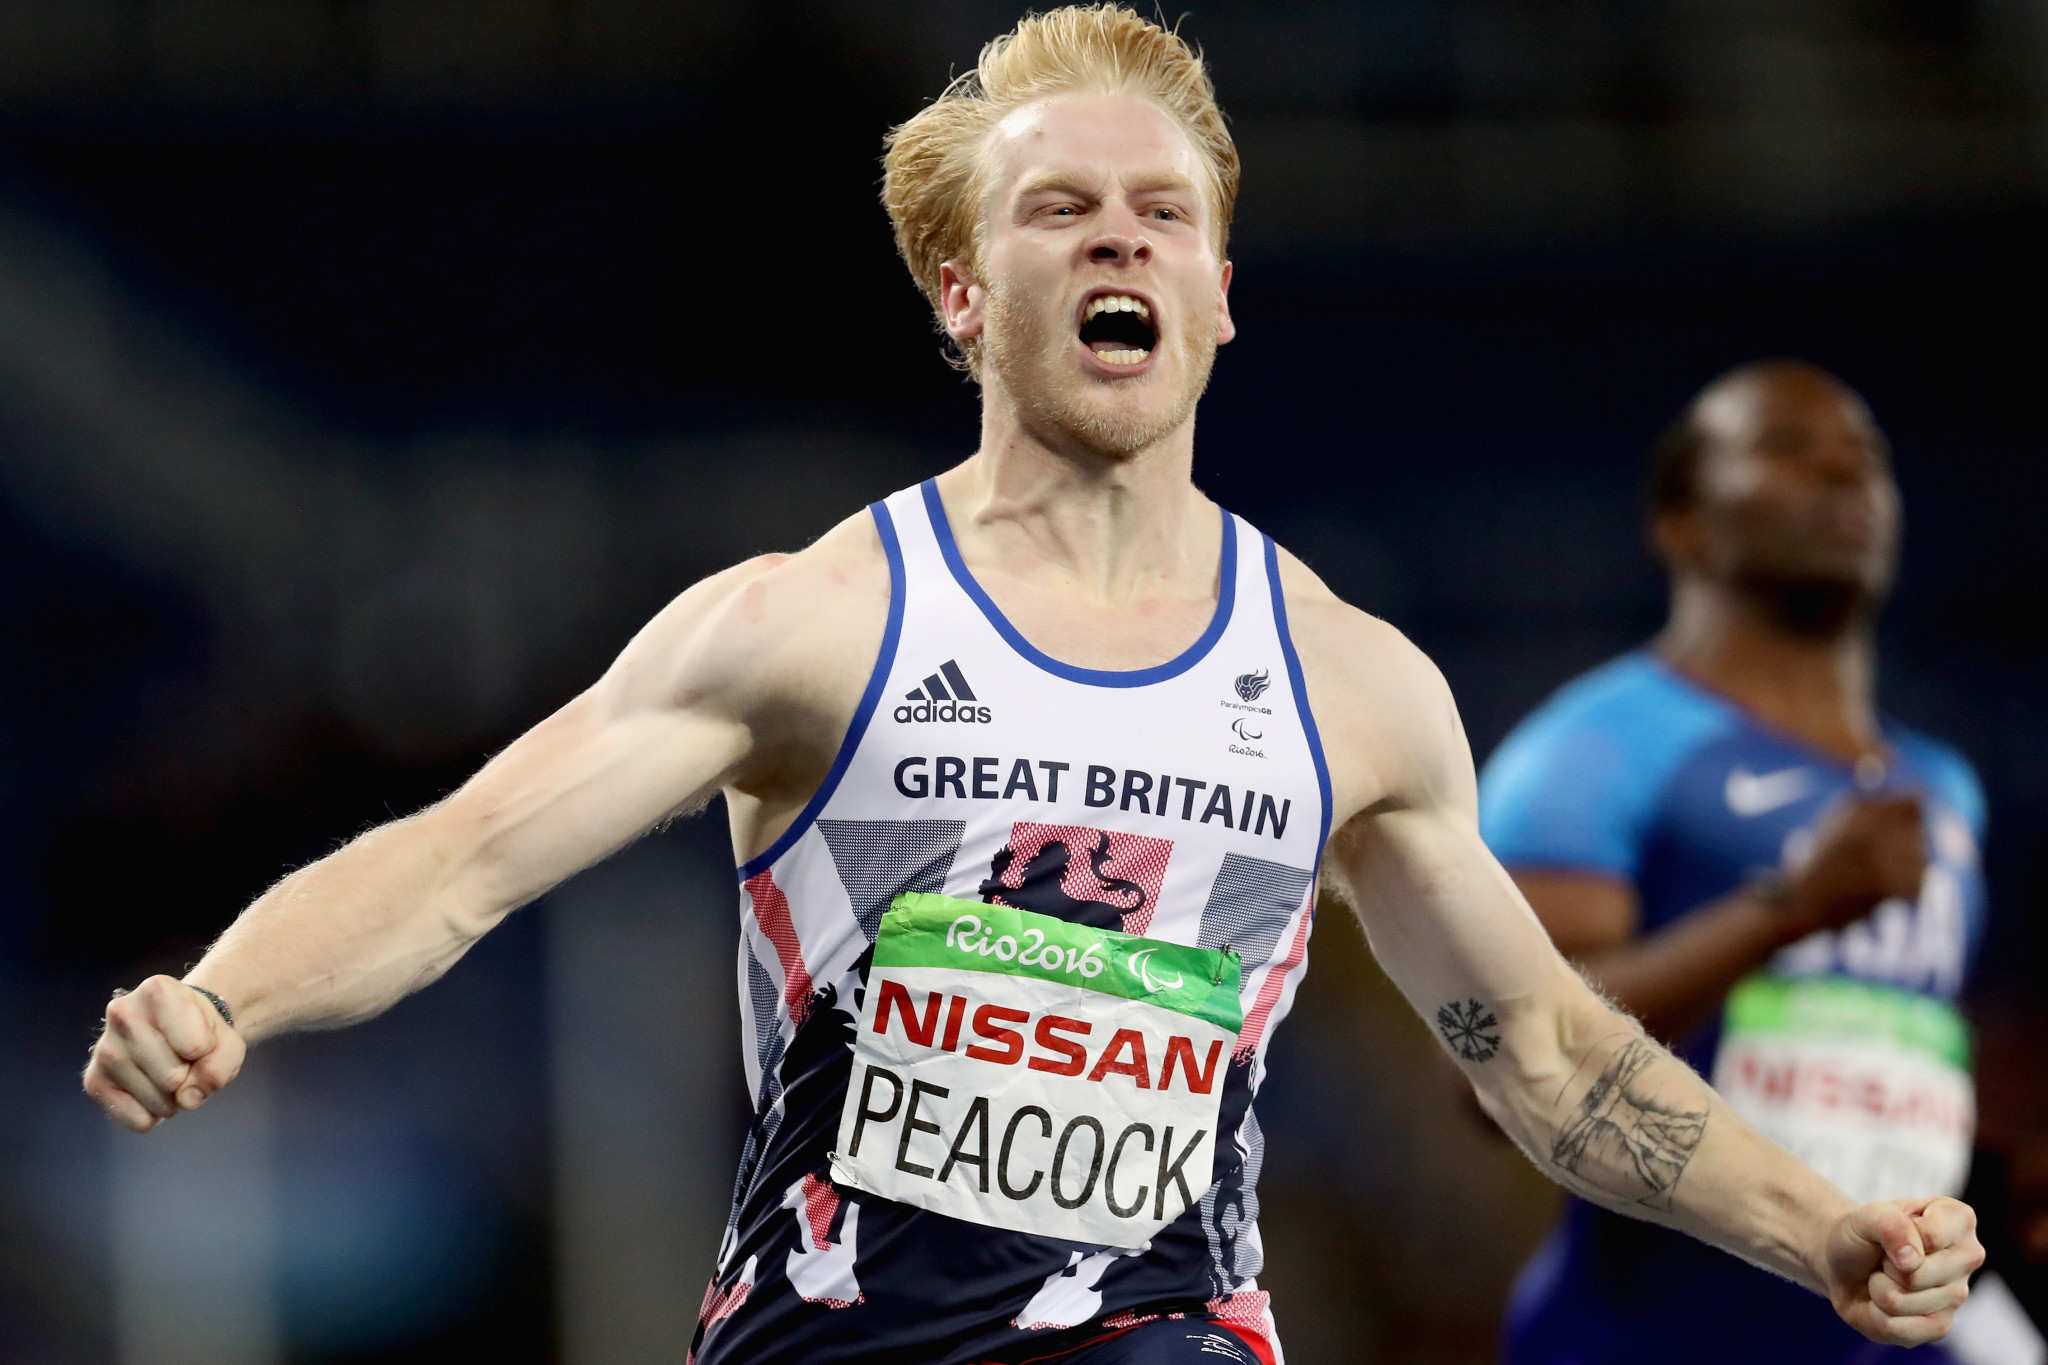 Britain’s two-time Paralympic 100 metre champion Jonnie Peacock is the first guest to appear on the podcast ©Getty Images